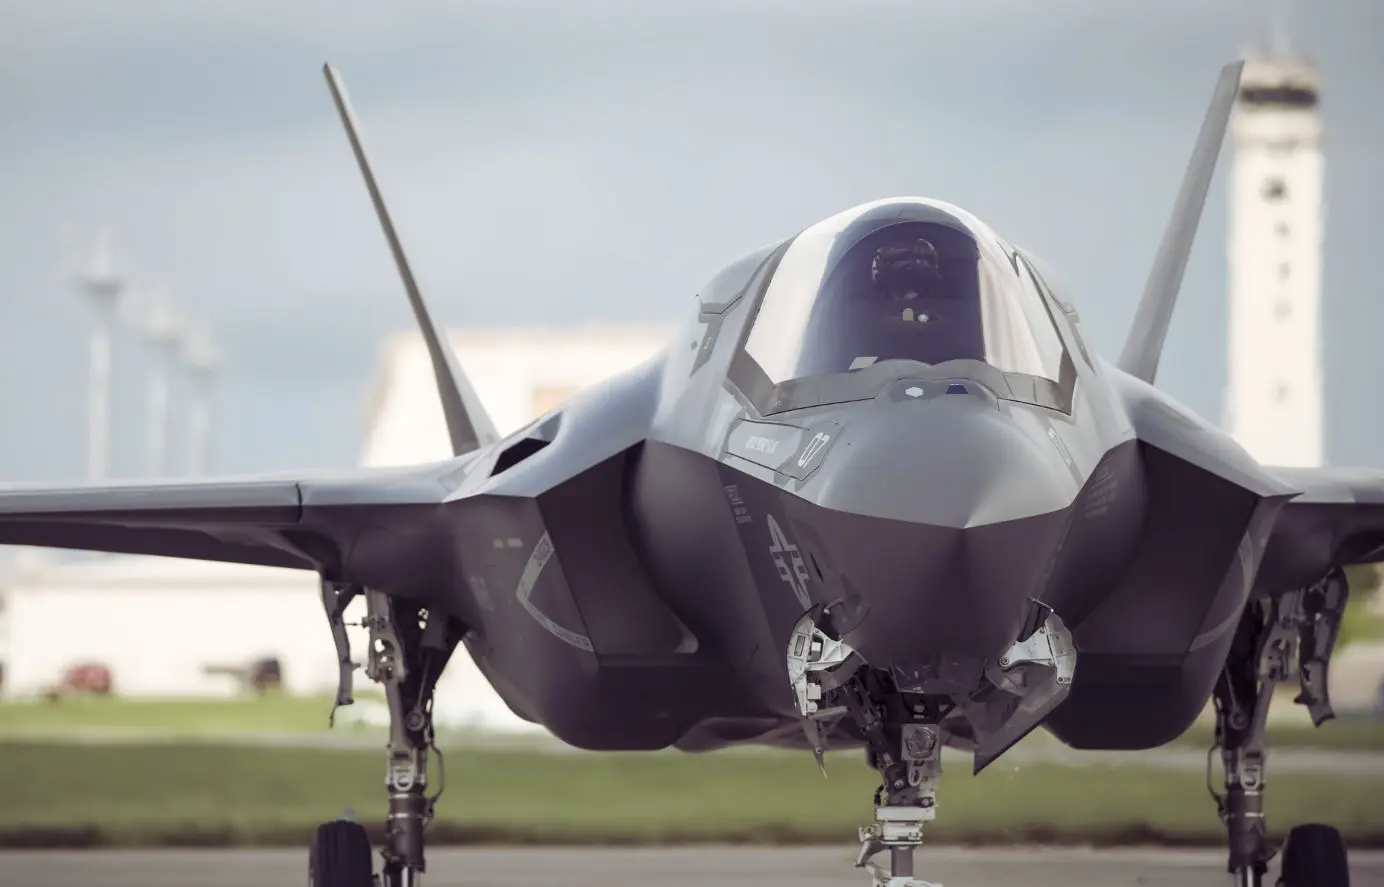 The F-35 fighter aircraft is made by Lockheed Martin